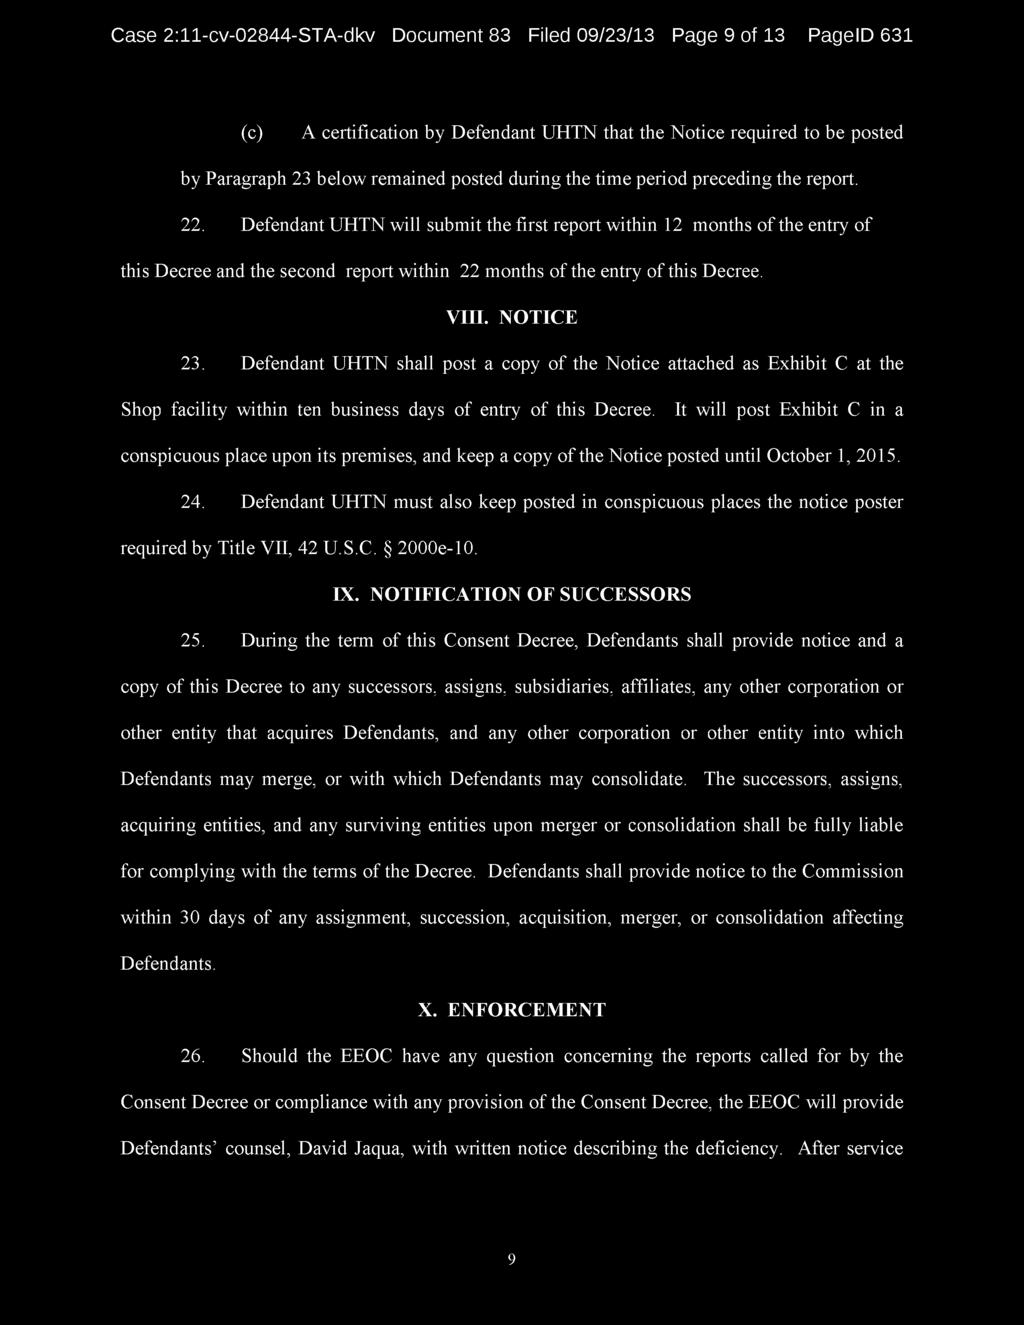 VIII. NOTICE 23. Defendant UHTN shall post a copy of the Notice attached as Exhibit C at the Shop facility within ten business days of entry of this Decree.